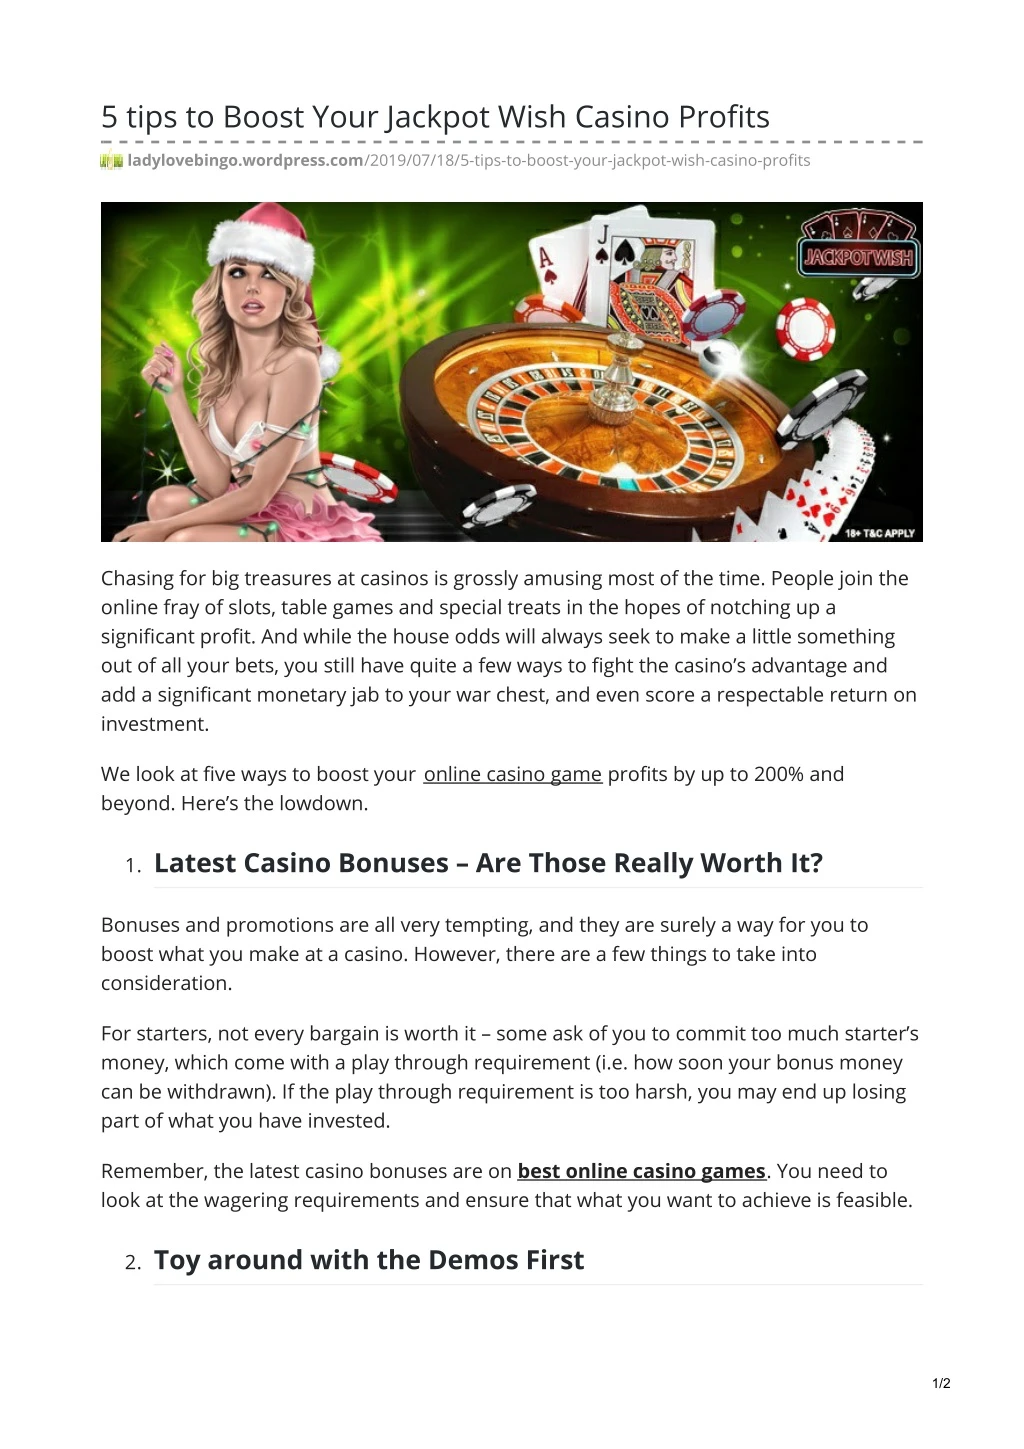 5 tips to boost your jackpot wish casino profits